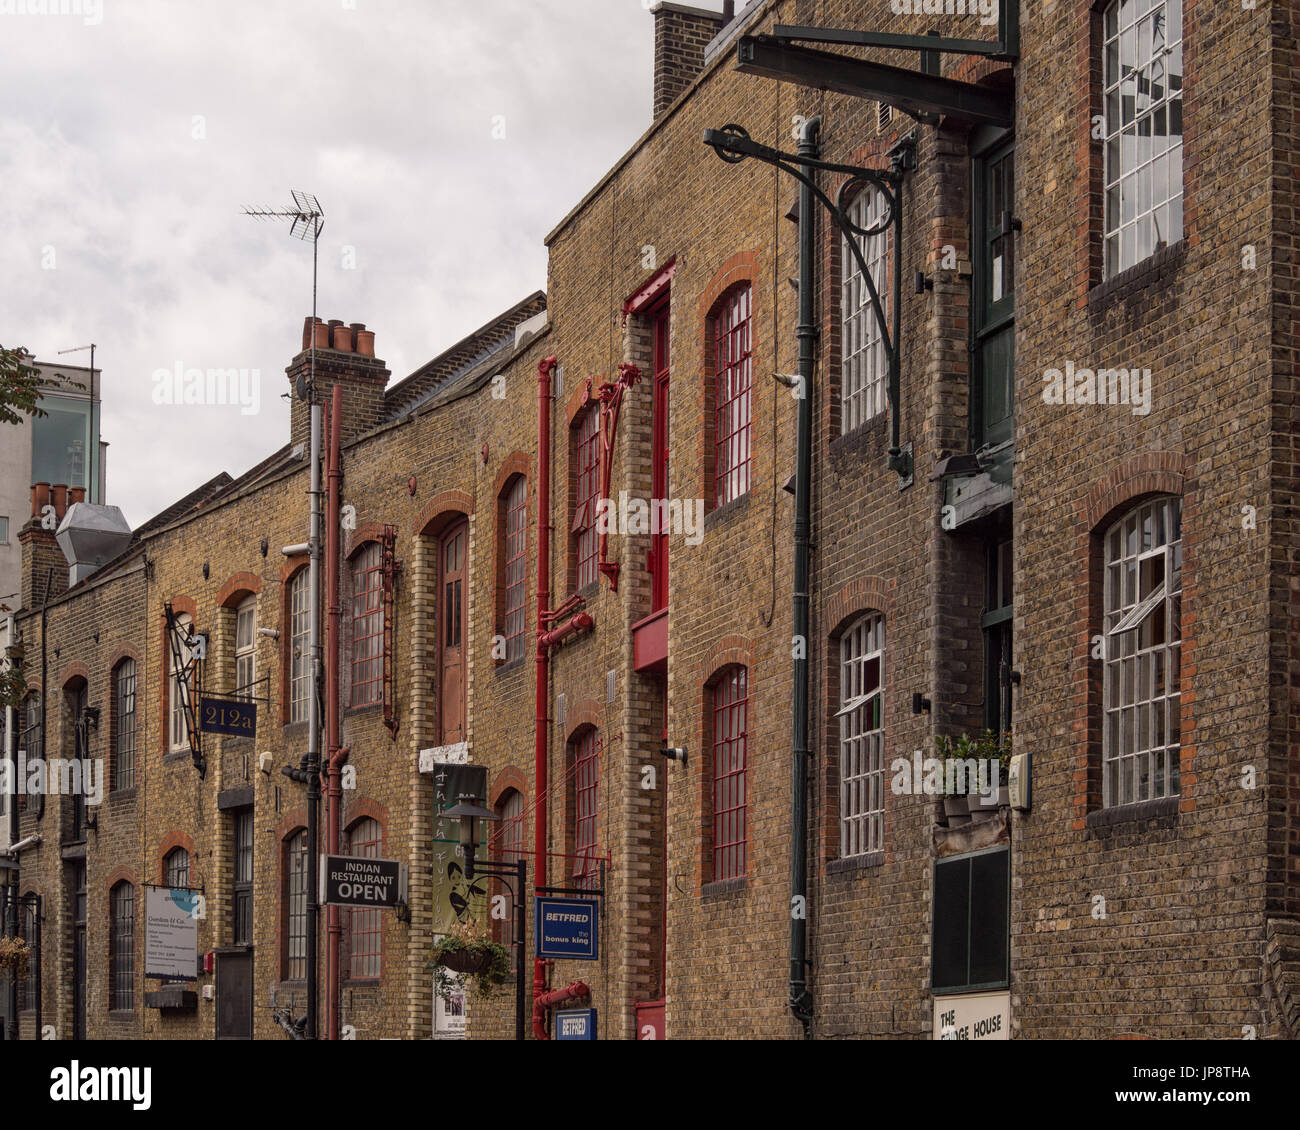 LONDON, UK - JULY 29, 2017:  View of old Warehouse Fixtures along Historic Street of Shad Thames in Bermondsey Stock Photo